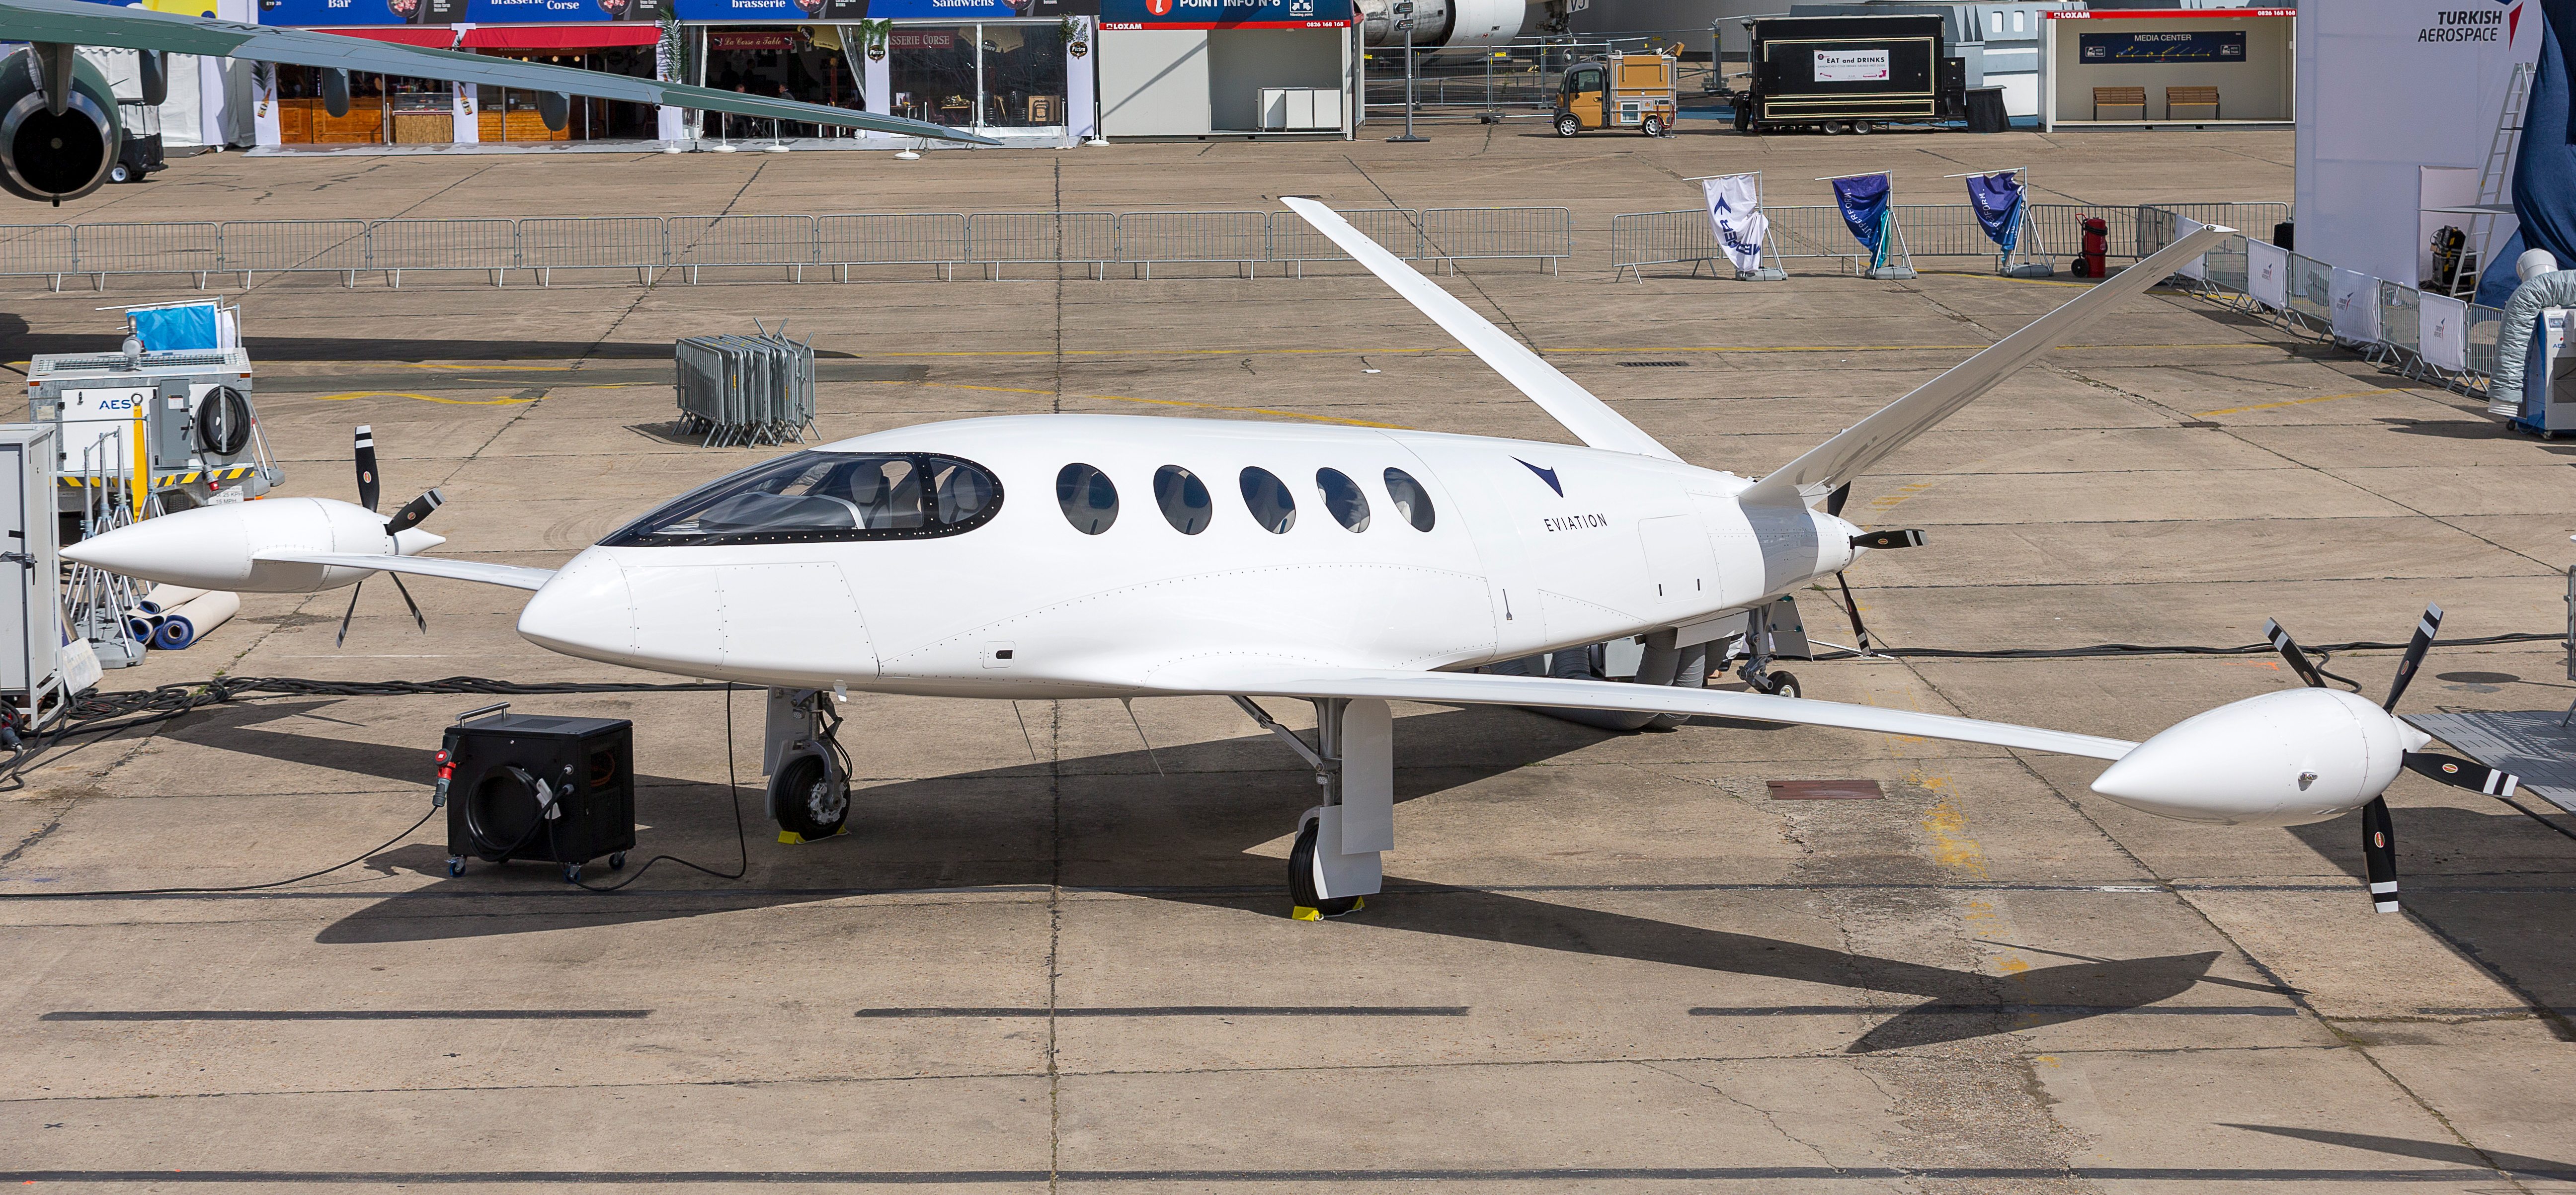 The Eviation Alice on display at the Paris Air Show.